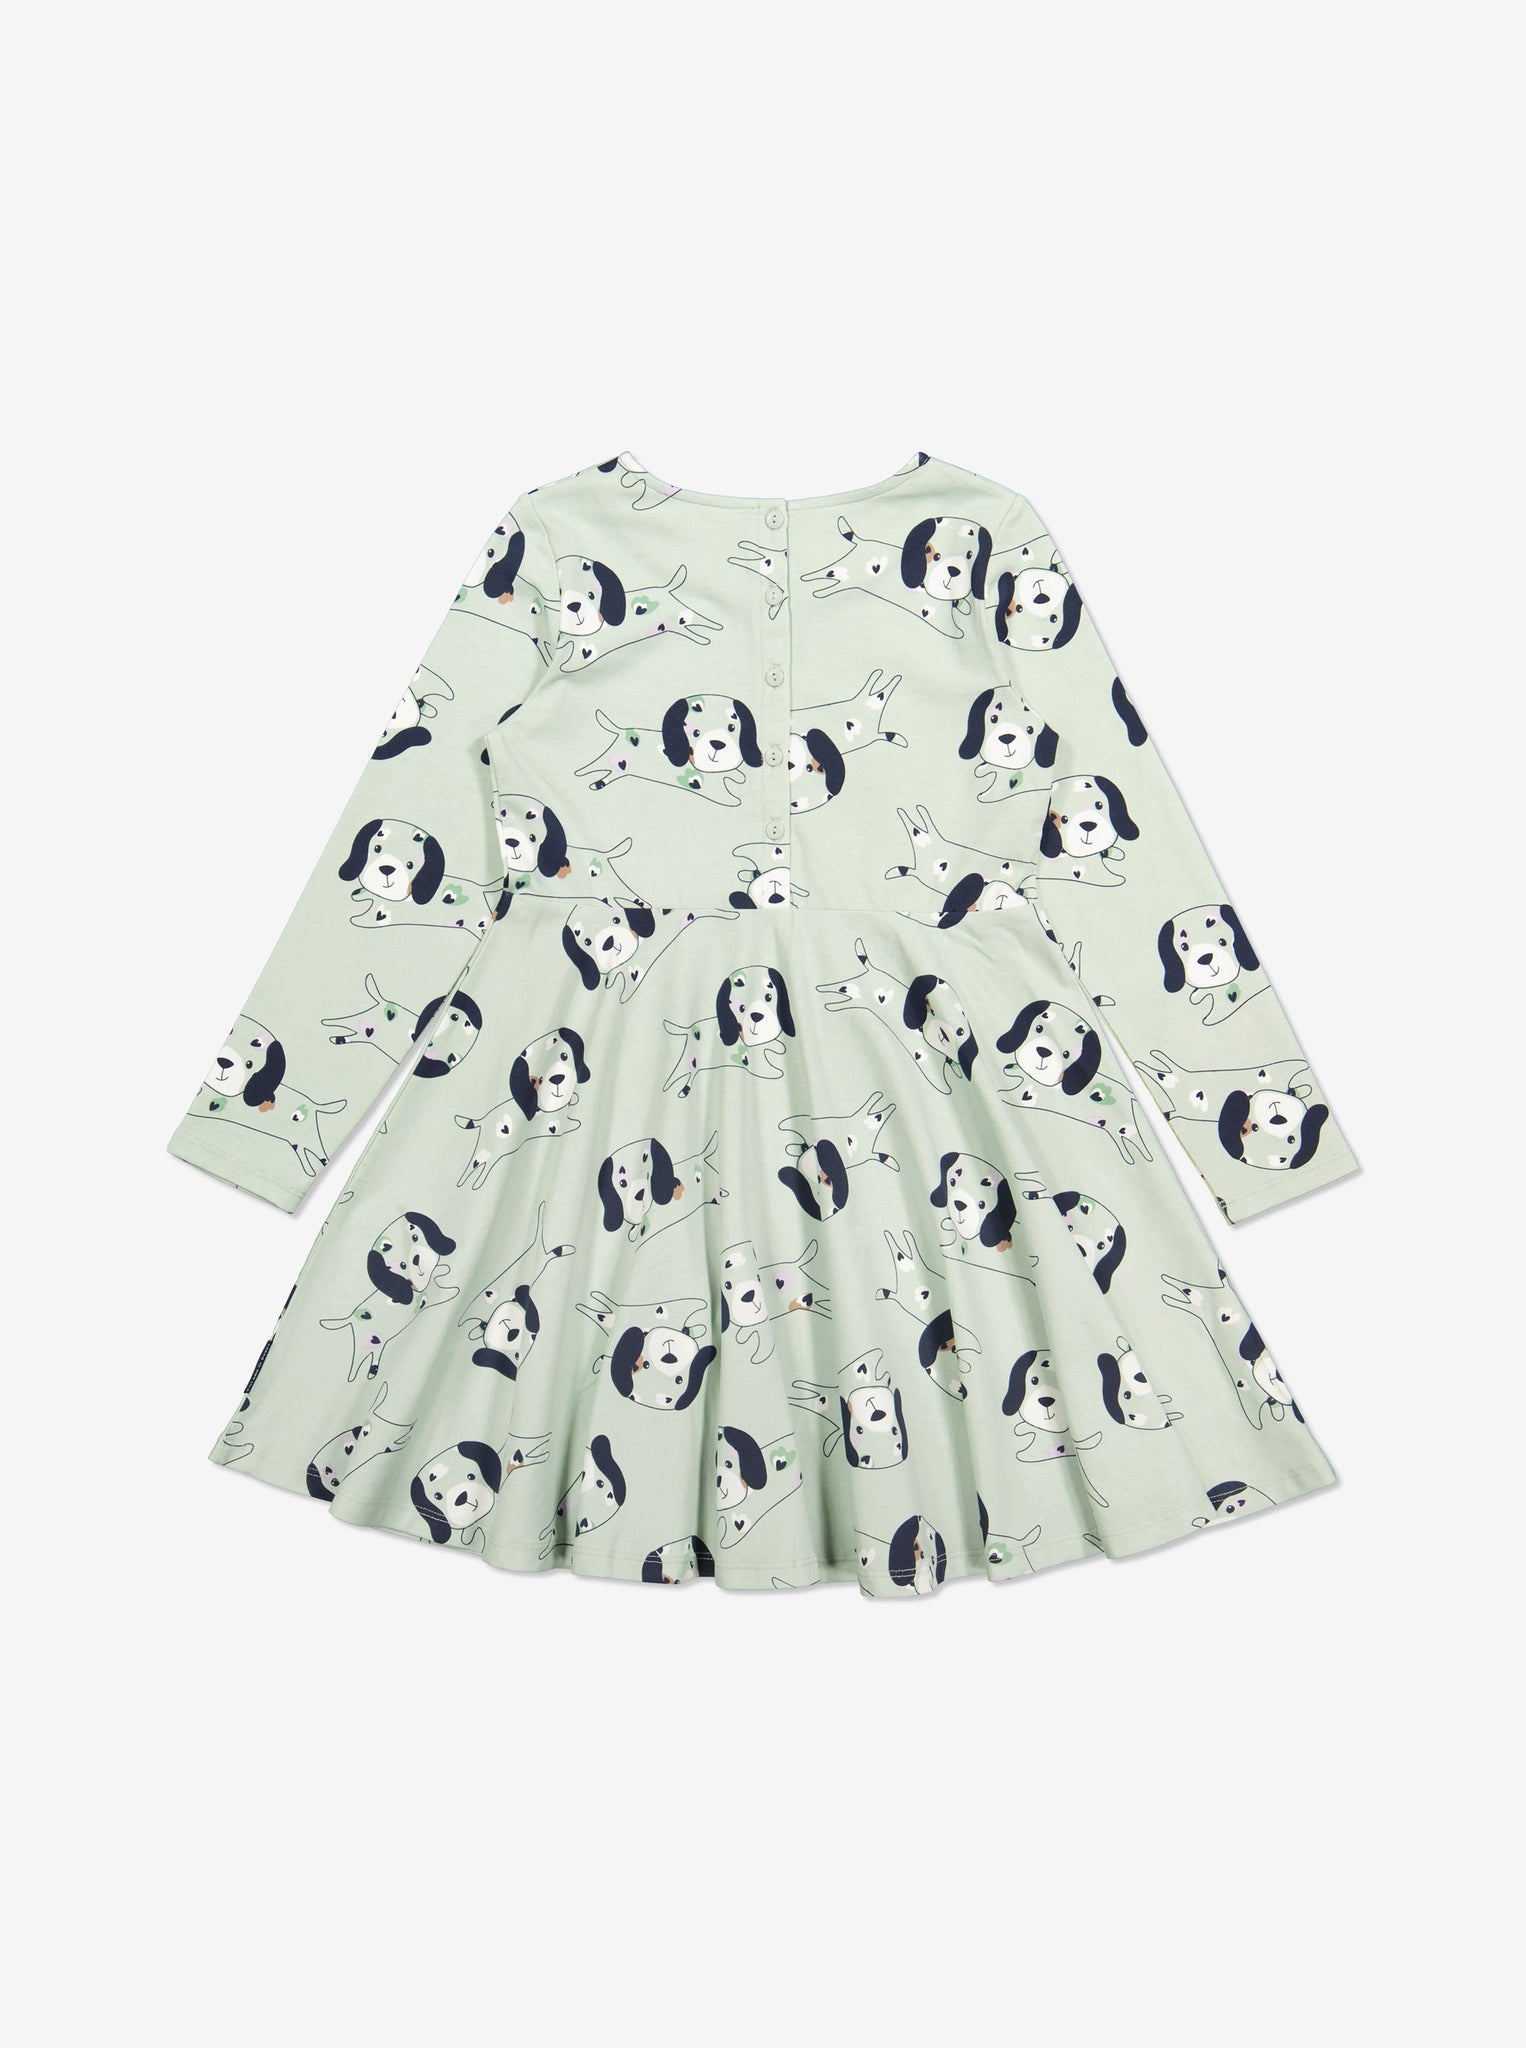  Organic Green Puppy Print Girls Dress from Polarn O. Pyret Kidswear. Made from ethically sourced materials.